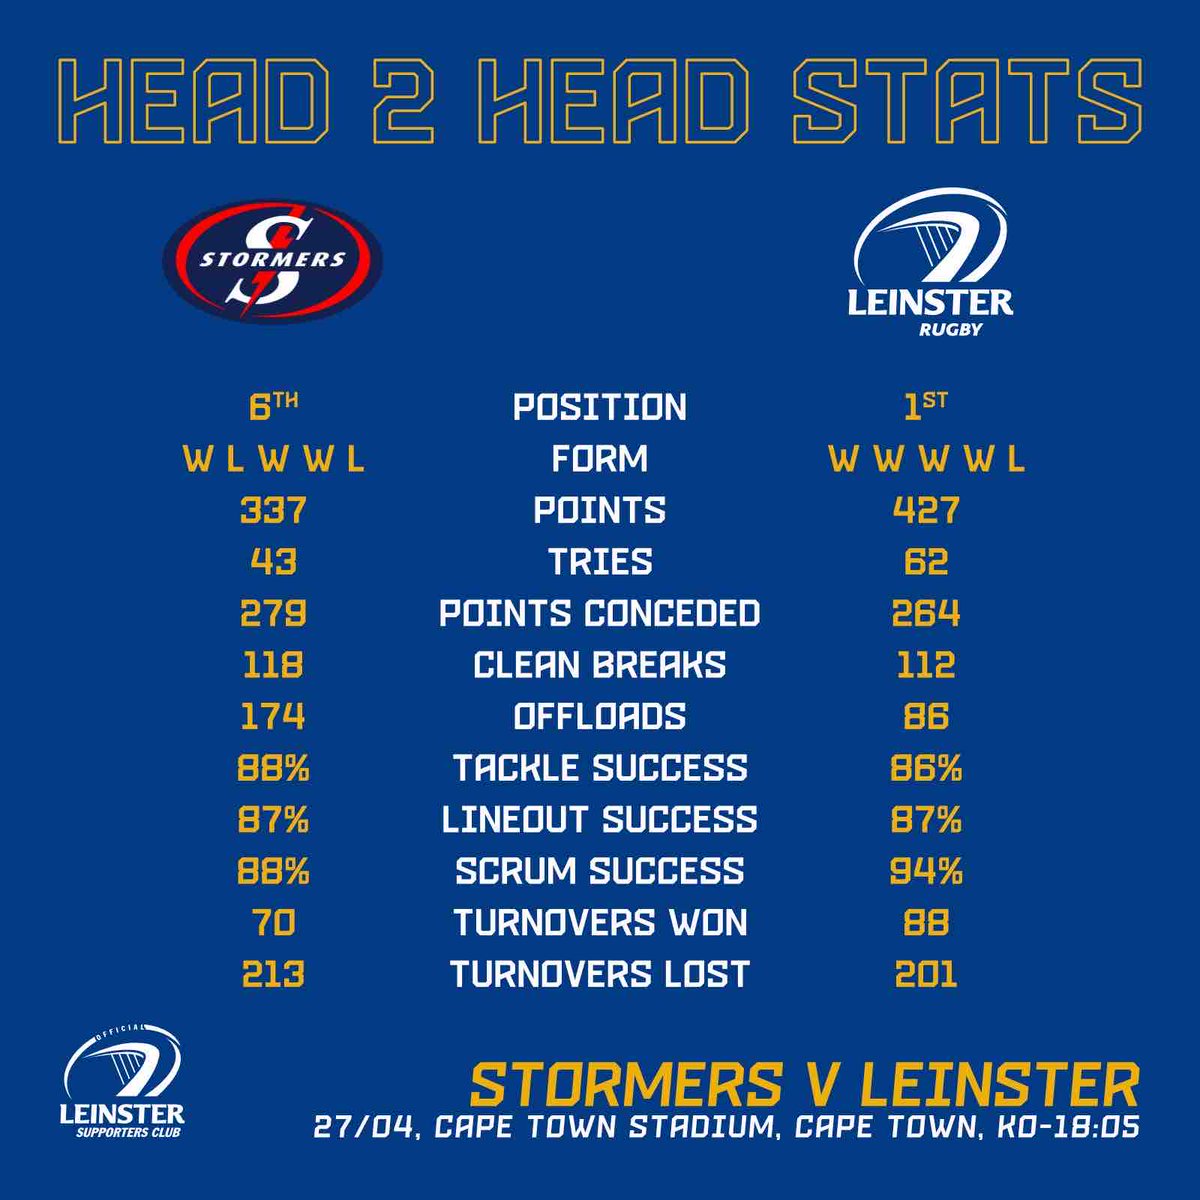 Final one of our stats to our game later today (4/4) #COYBIB